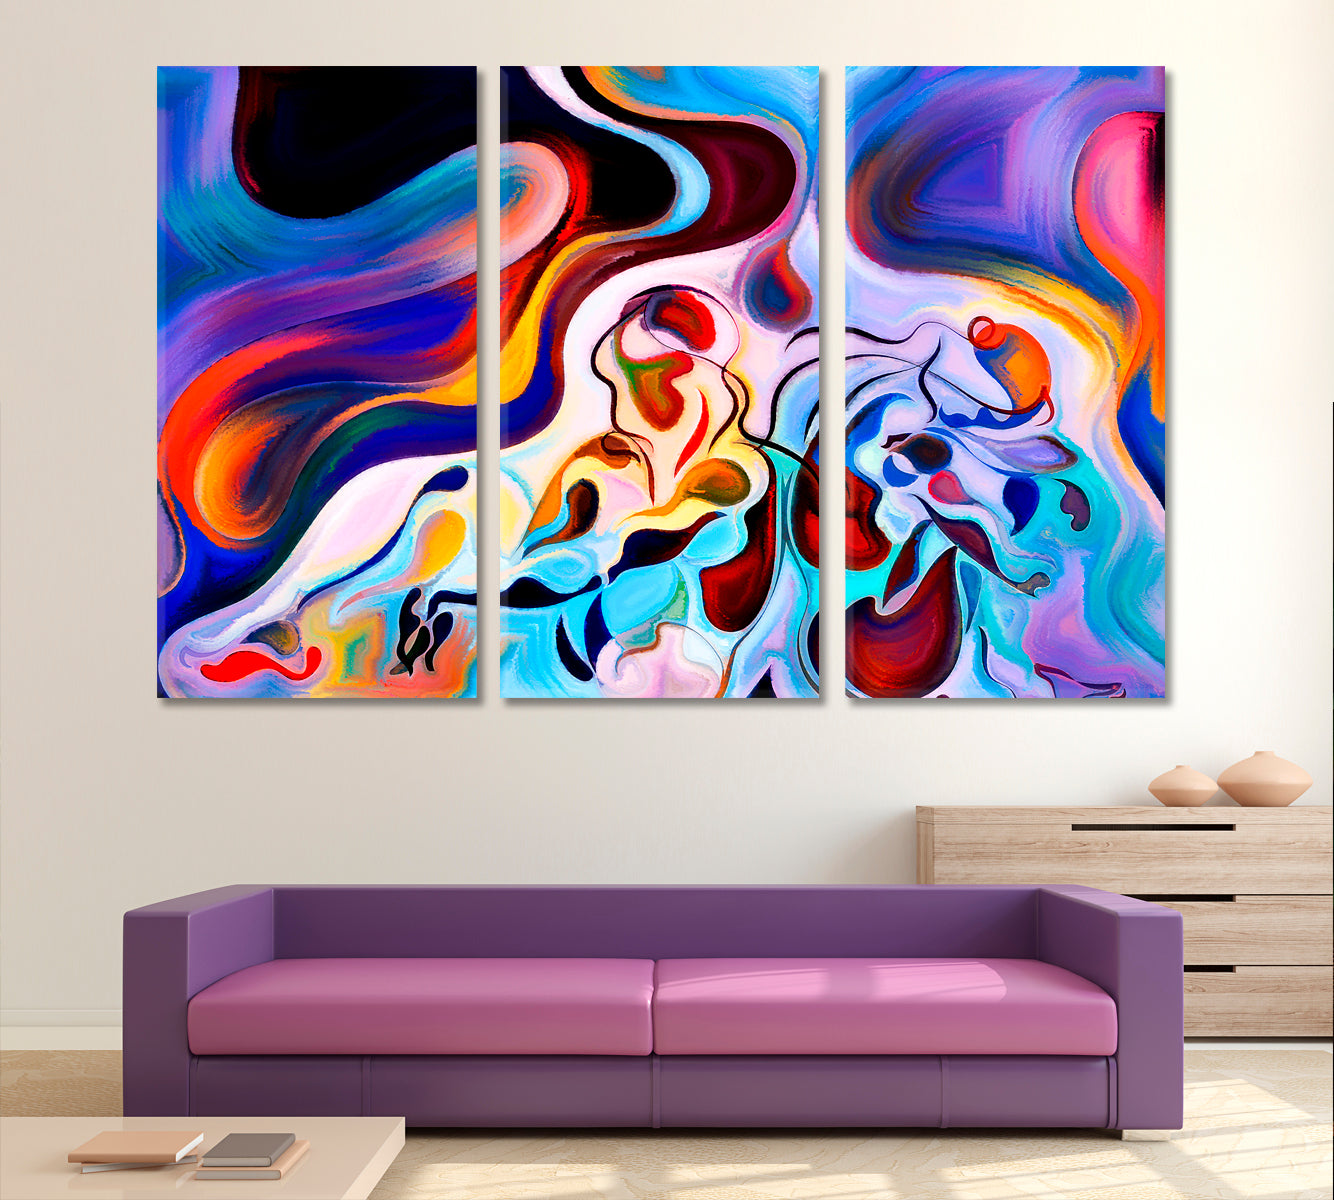 People And Bright Forms Abstract Art Print Artesty 3 panels 36" x 24" 